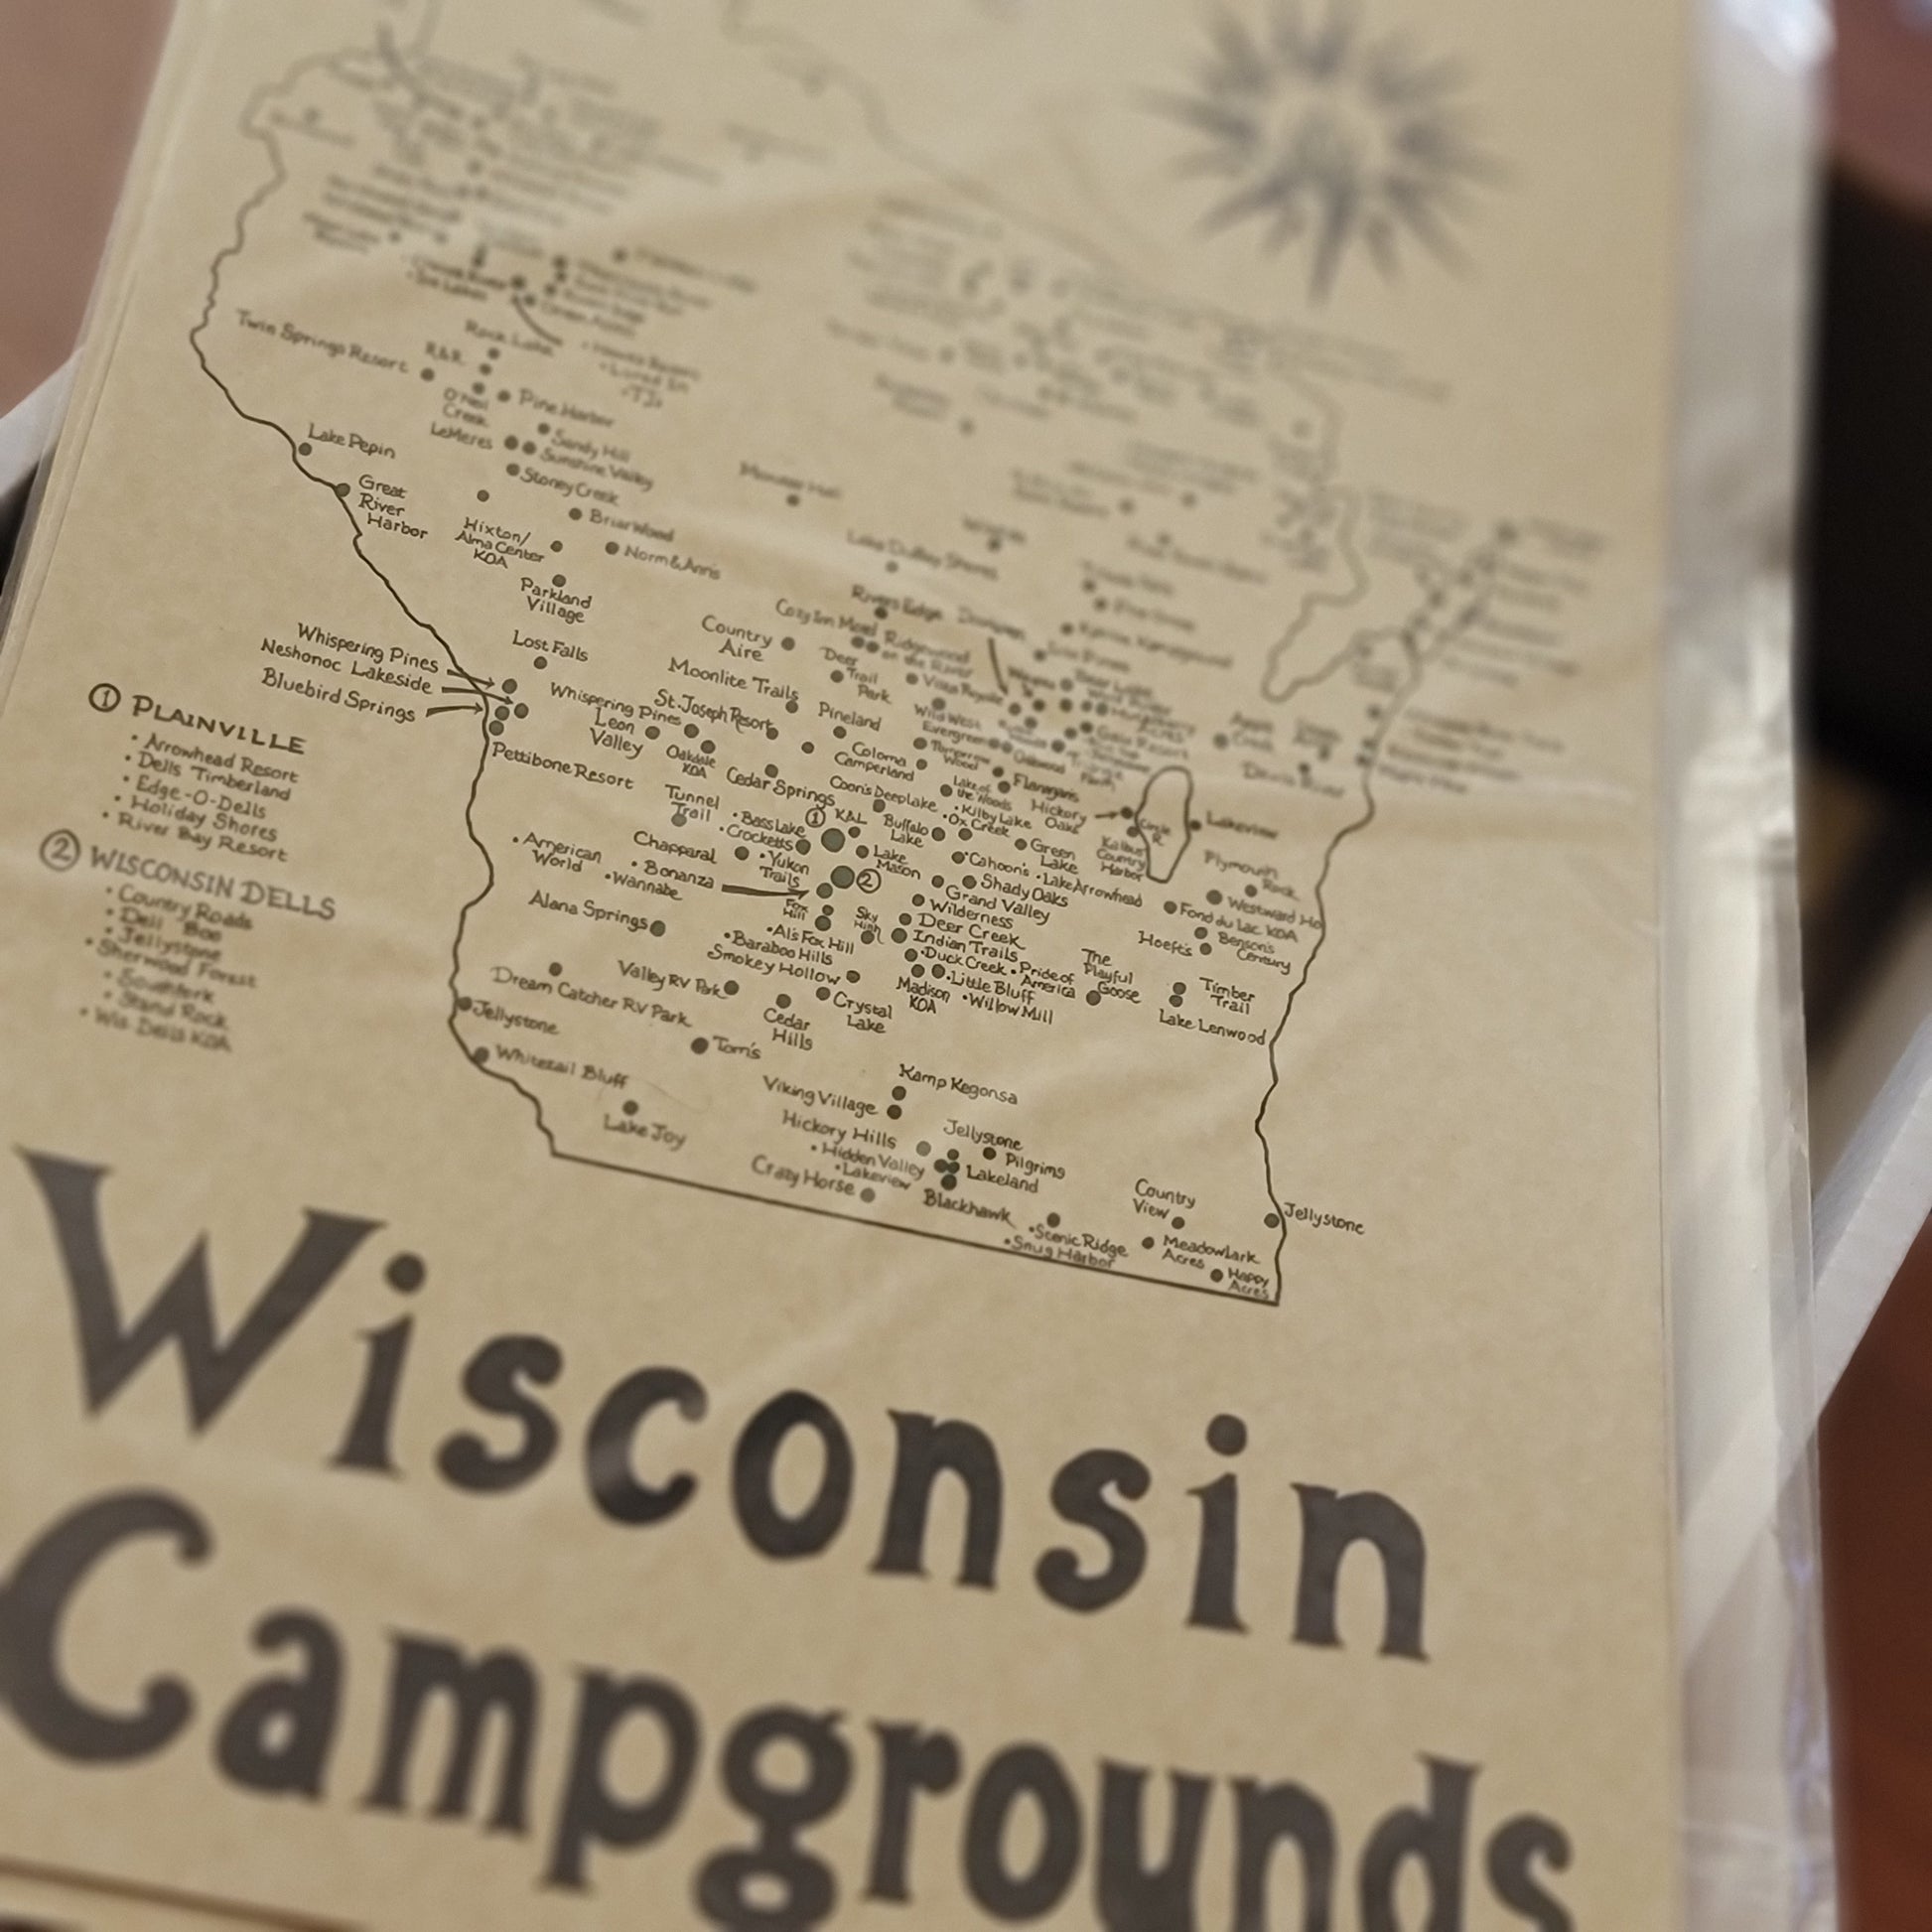 Wisconsin campgrounds